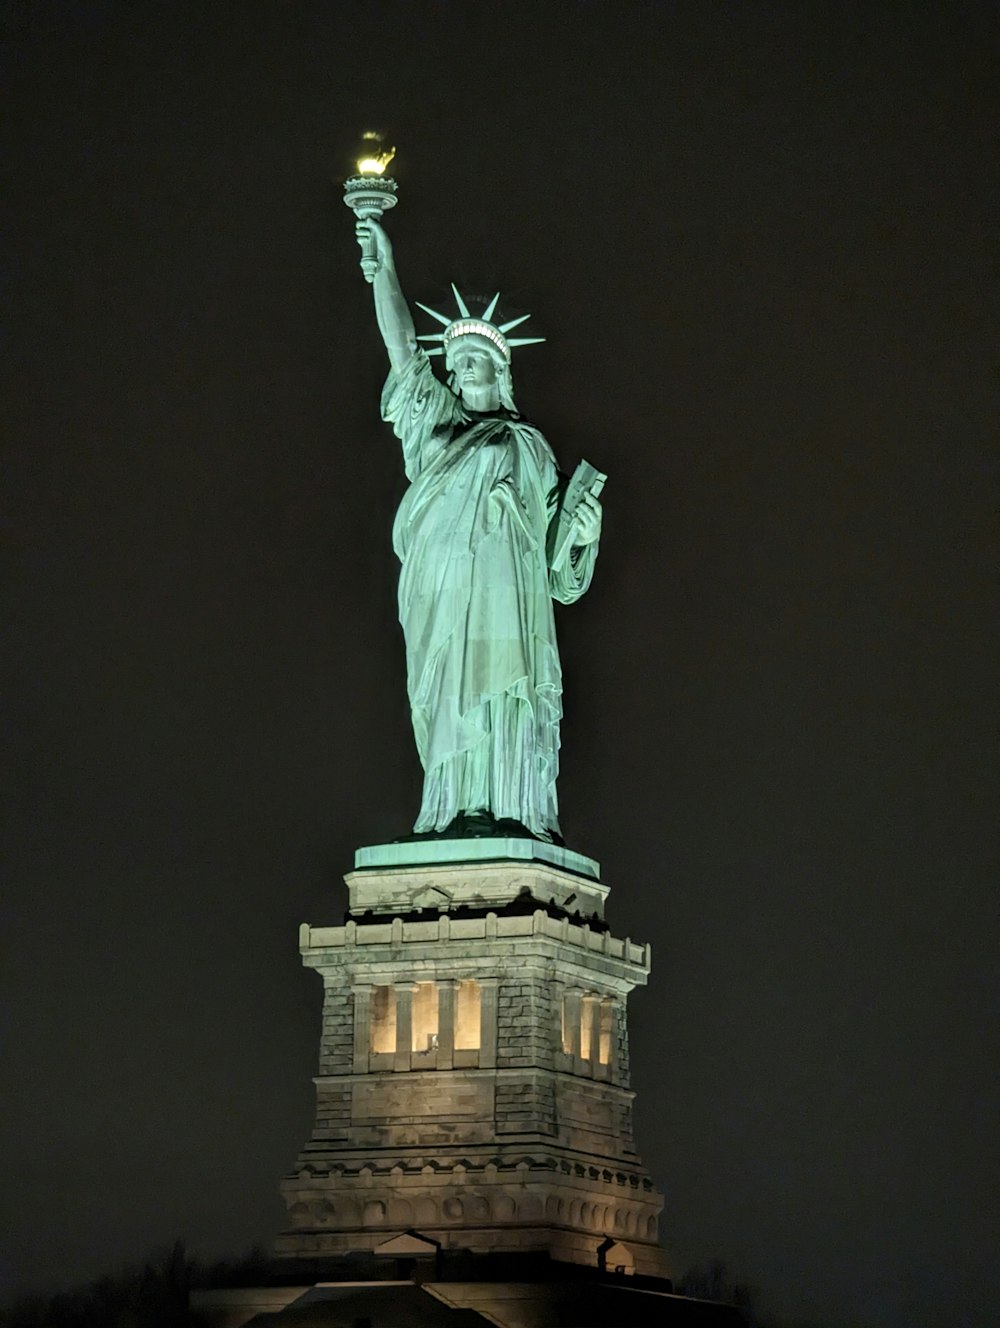 the statue of liberty lit up at night